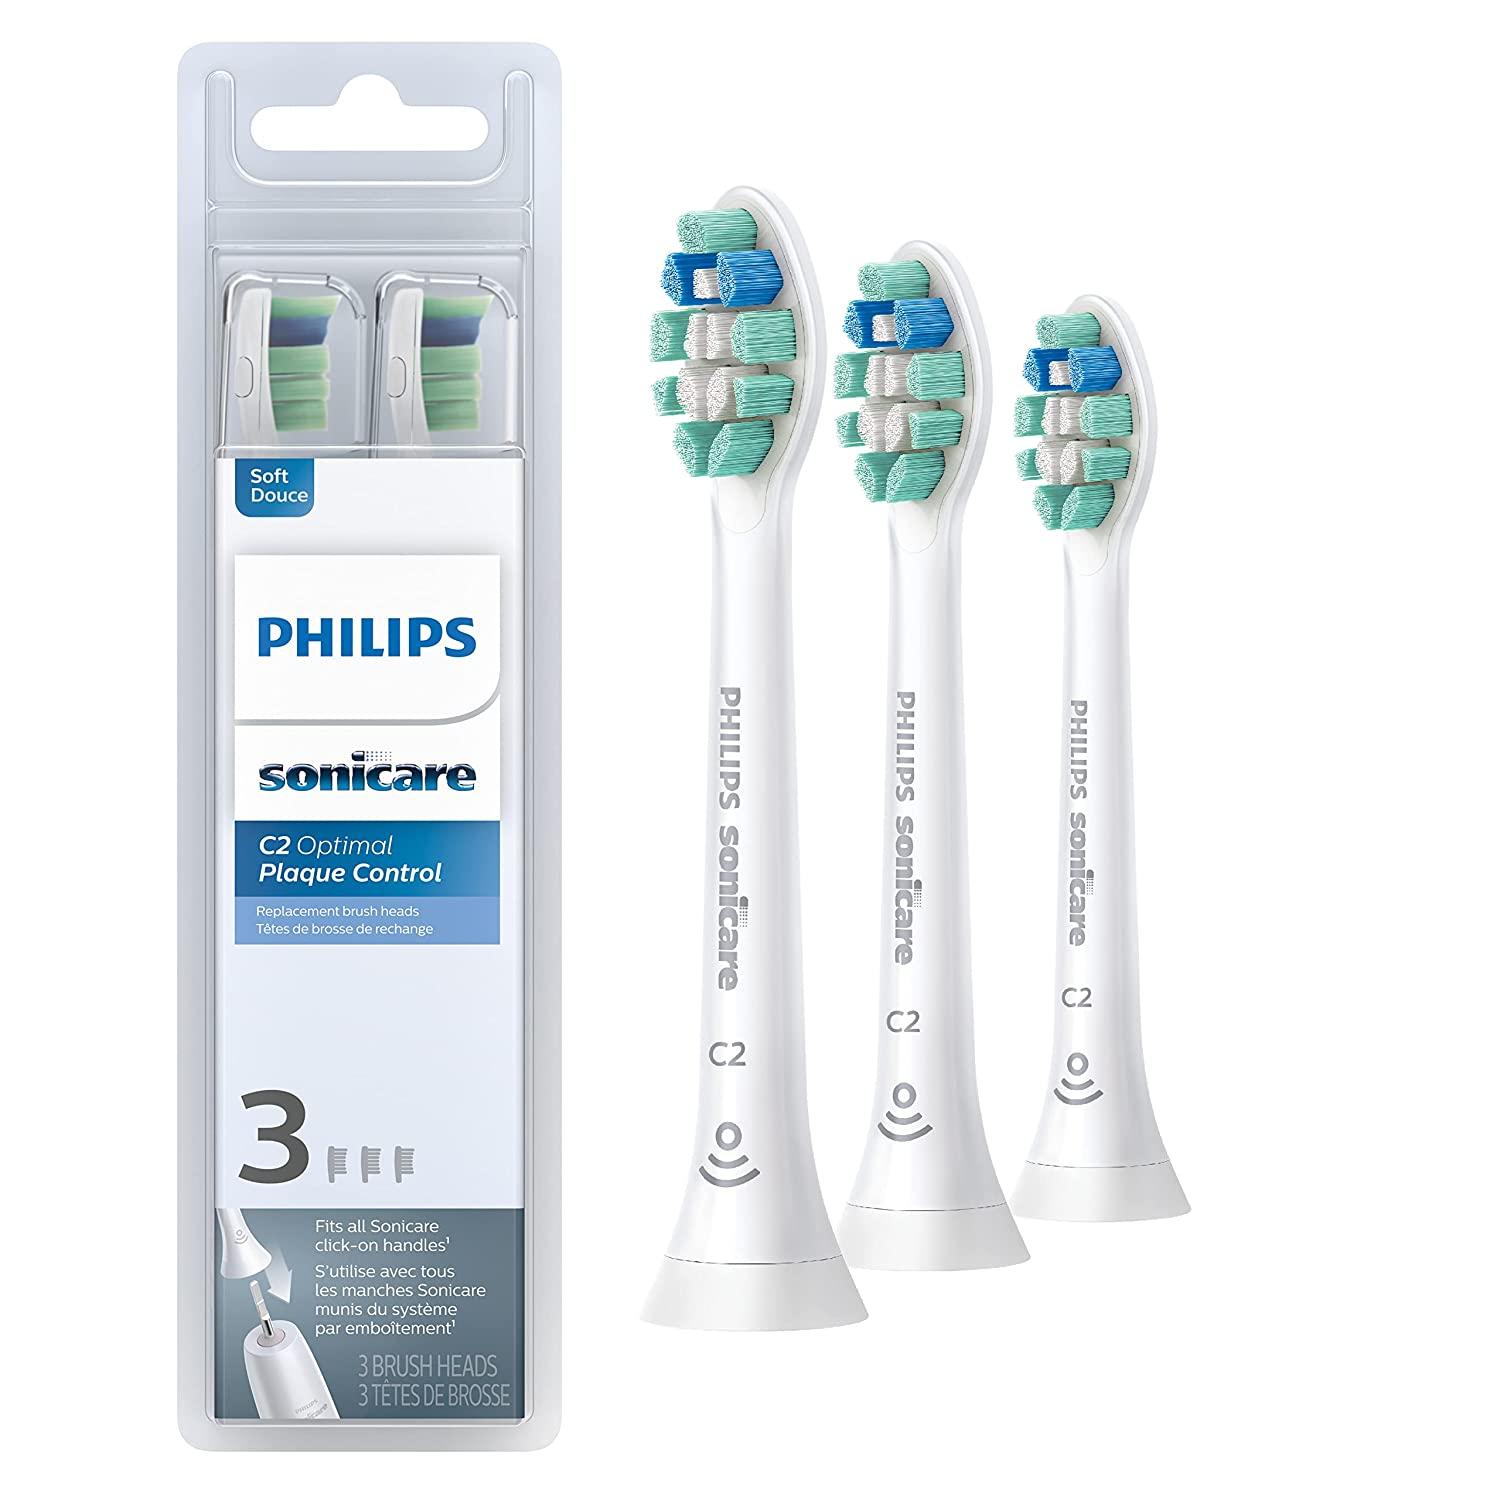 Philips Sonicare Genuine C2 Plaque Control Toothbrush Heads for $17.82 Shipped